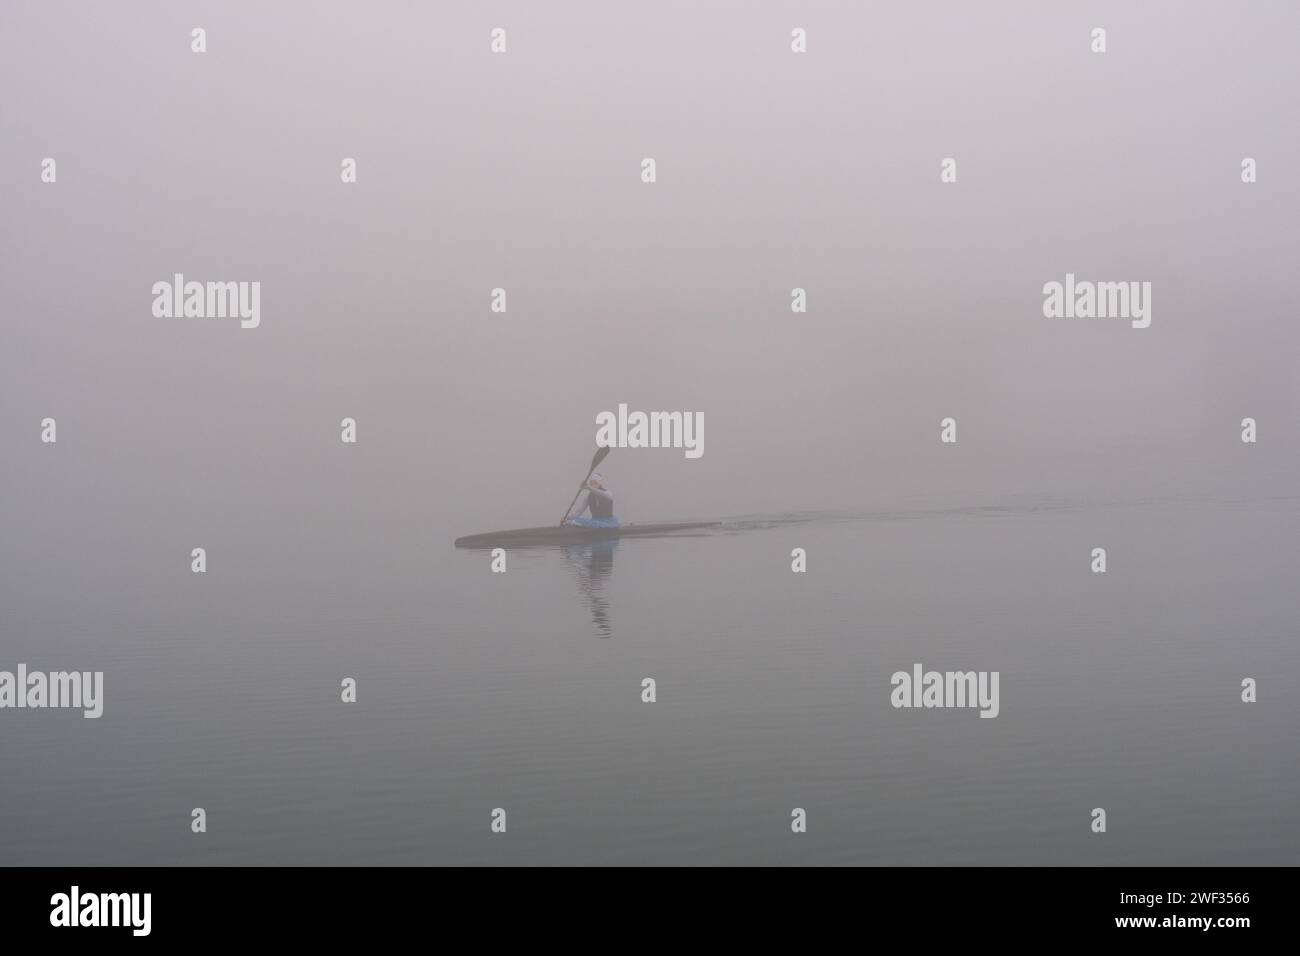 Grado, Italy - January 28th, 2024: Girl practices rowing during a day of thick fog in the sea of Grado. Intense sport with canoe/kayak. Stock Photo